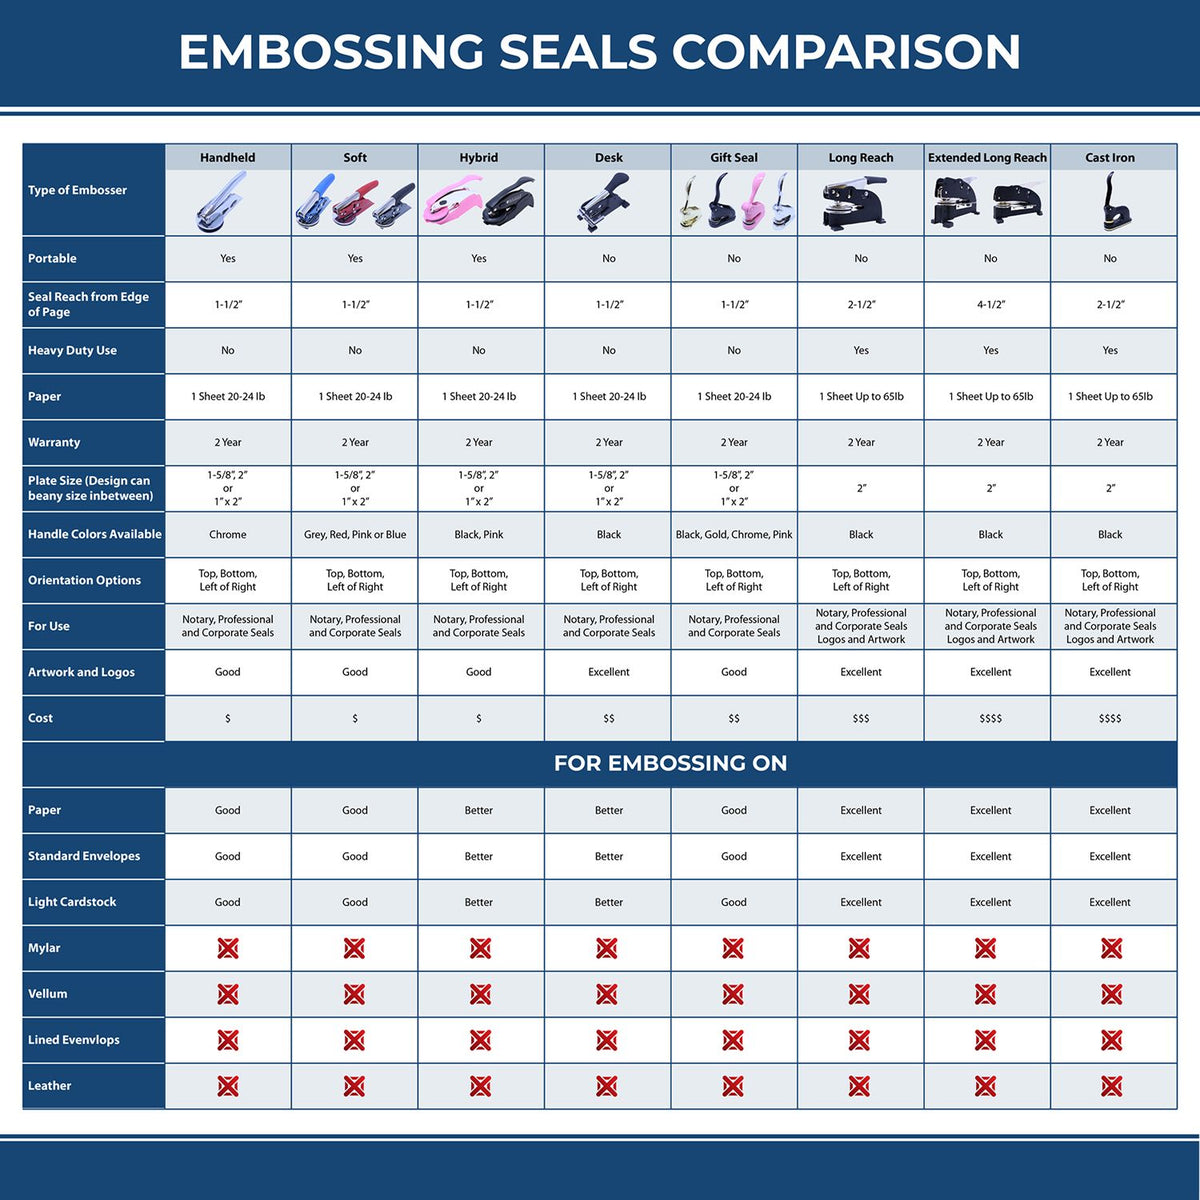 A comparison chart for the different types of mount models available for the Washington Engineer Desk Seal.